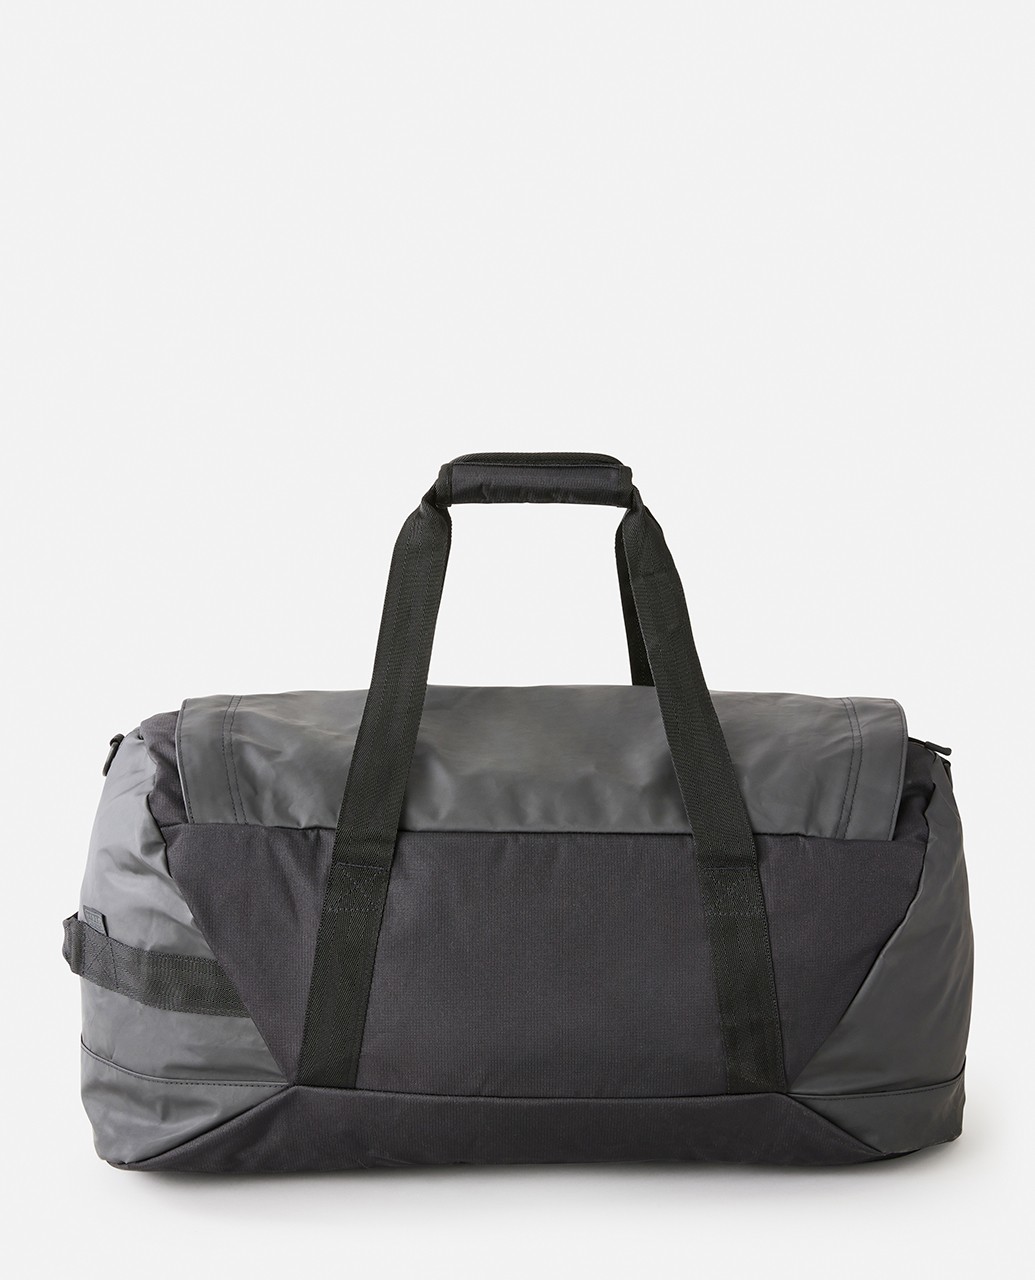 Rip Curl Packable Duffle 50L Midnight | Ozmosis | Bags